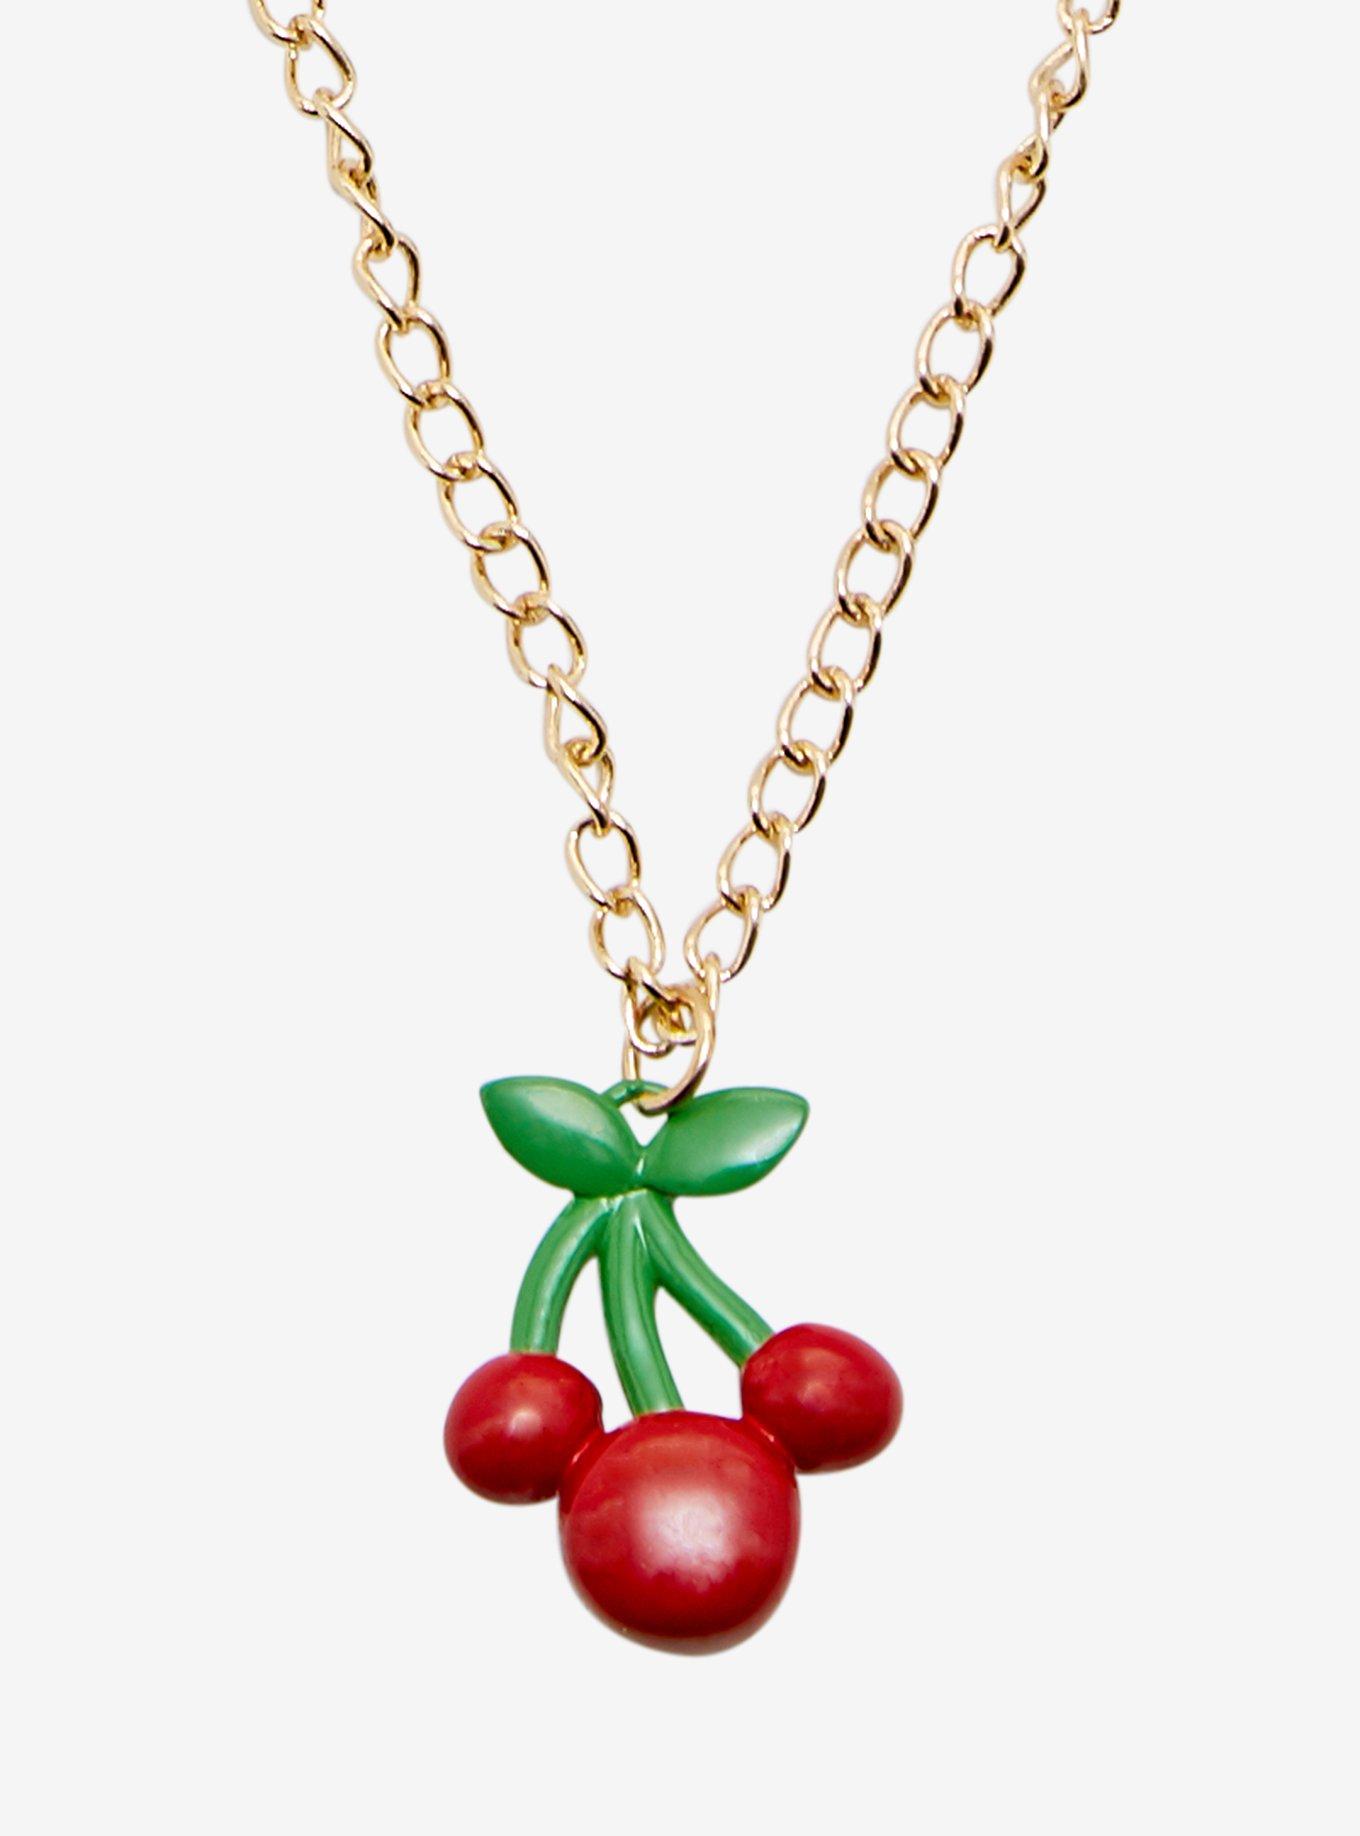 Disney Mickey Mouse Cherry Necklace, , hi-res